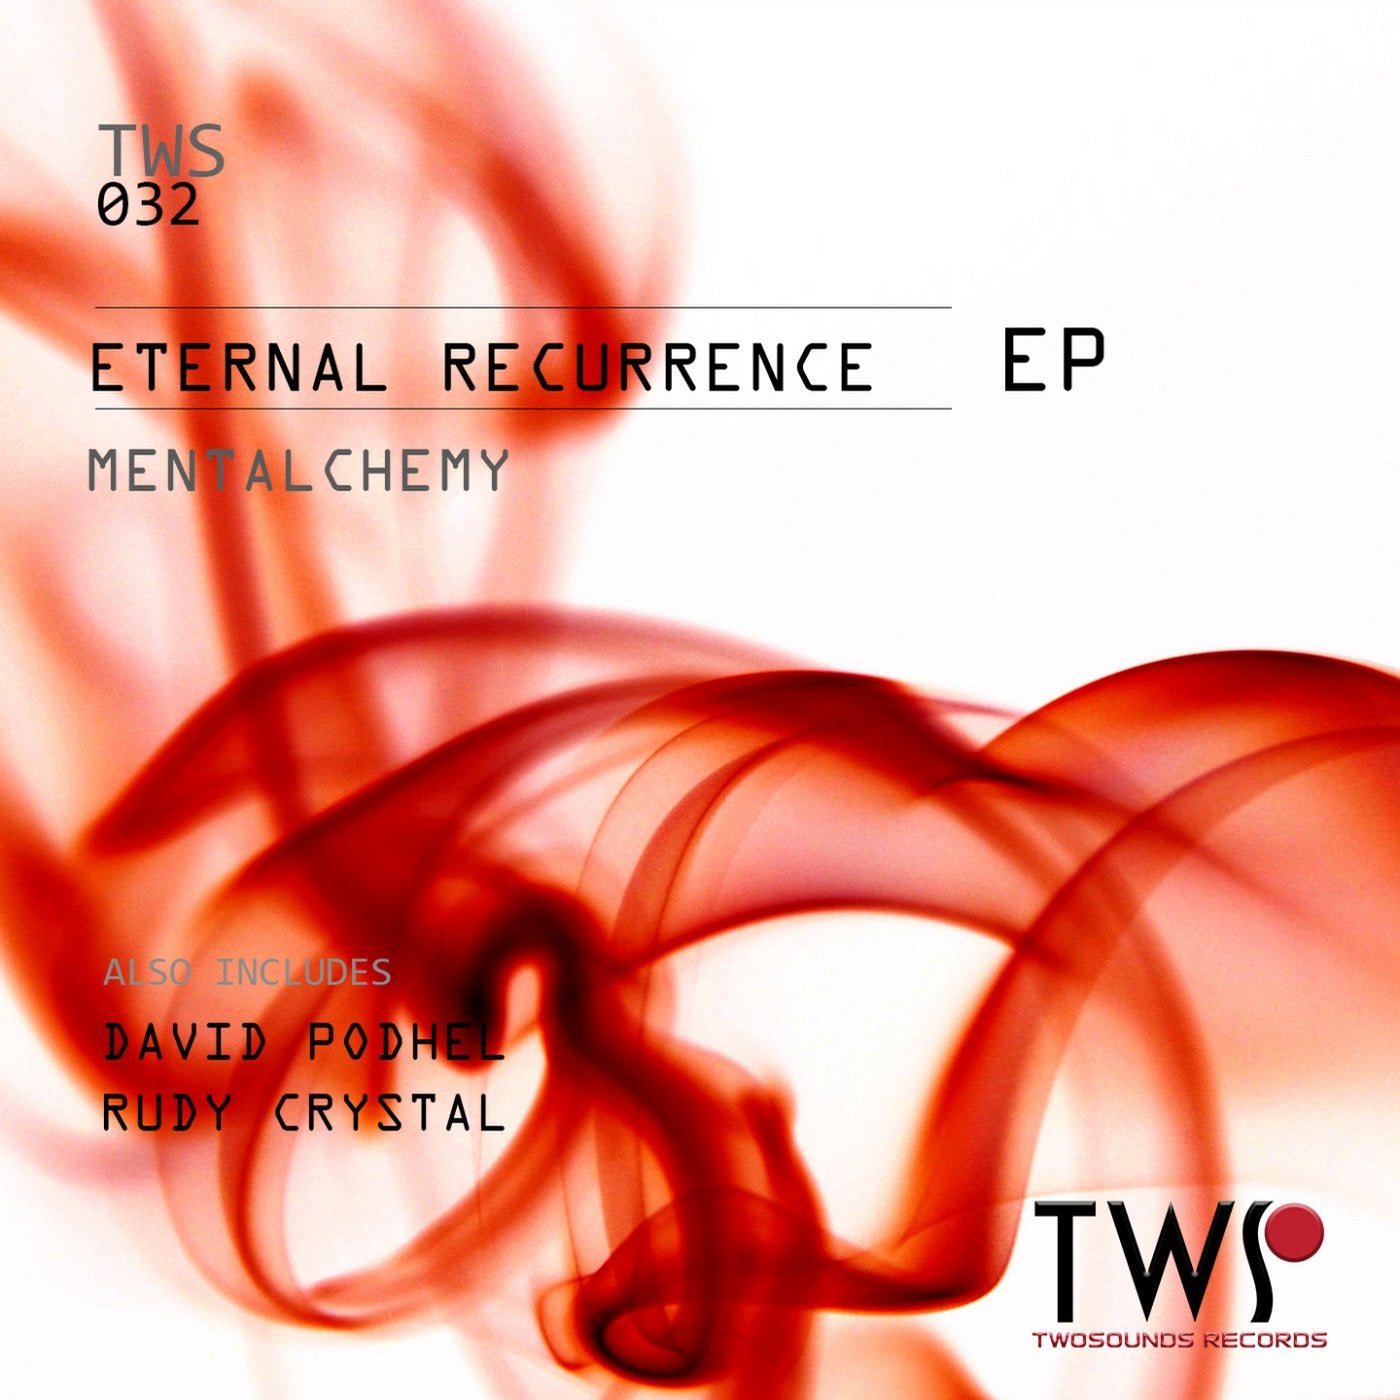 Eternal Recurrence